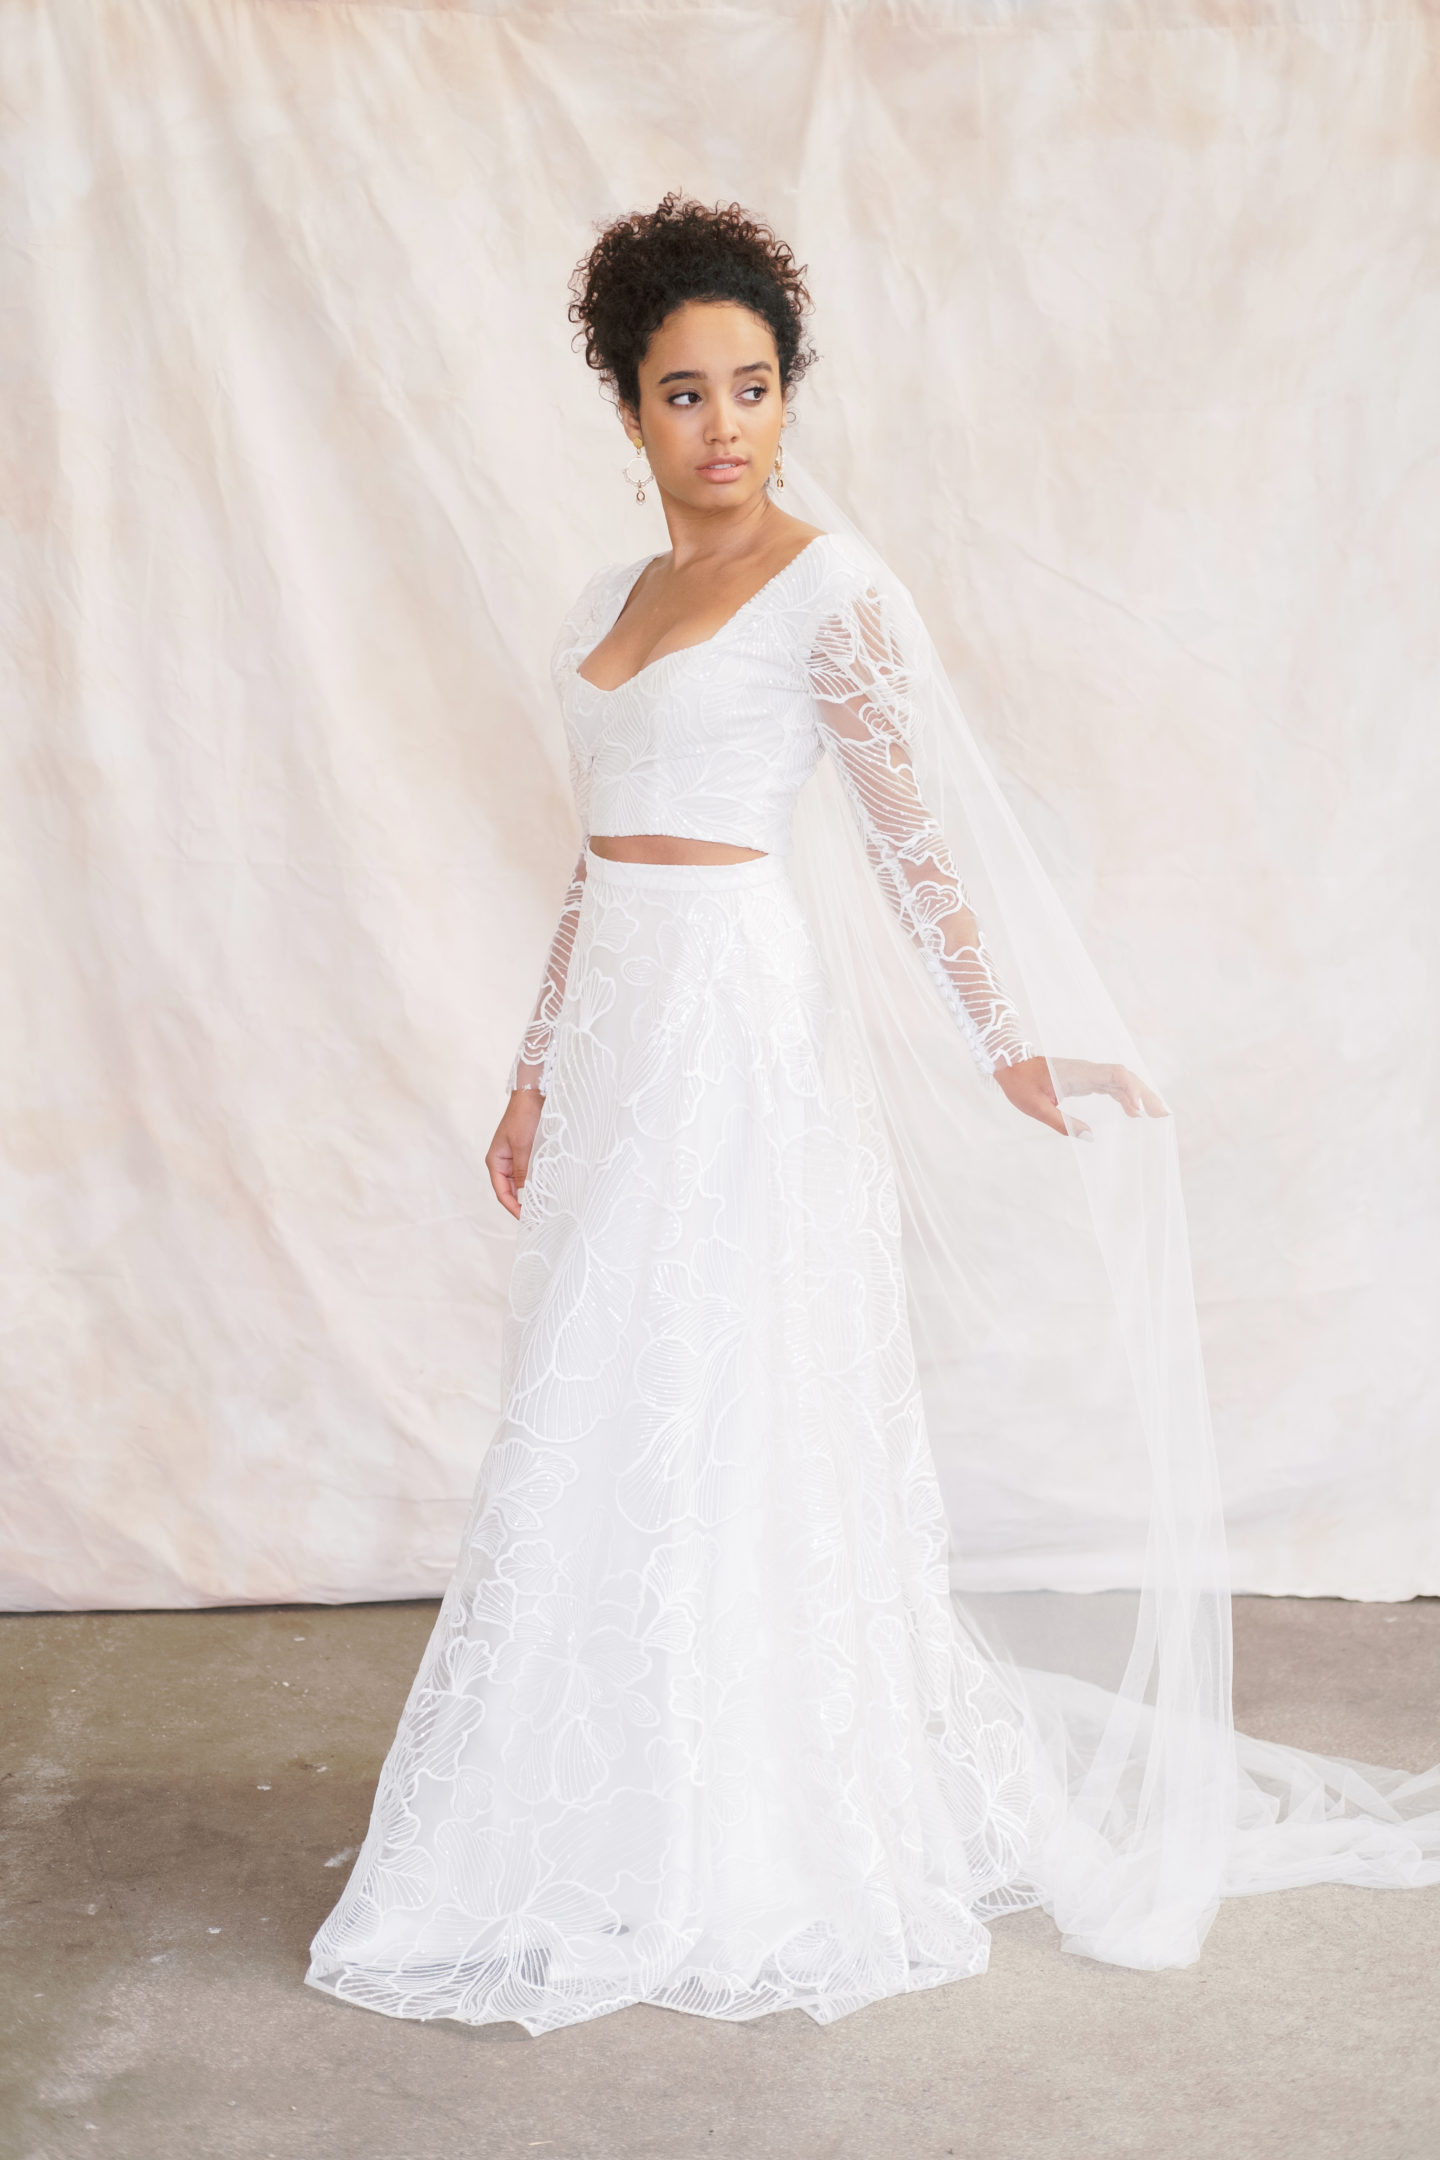 2021 Bridal Trends; Top 5 New Year Trends With Wedding Dress Designer Kate Edmonson